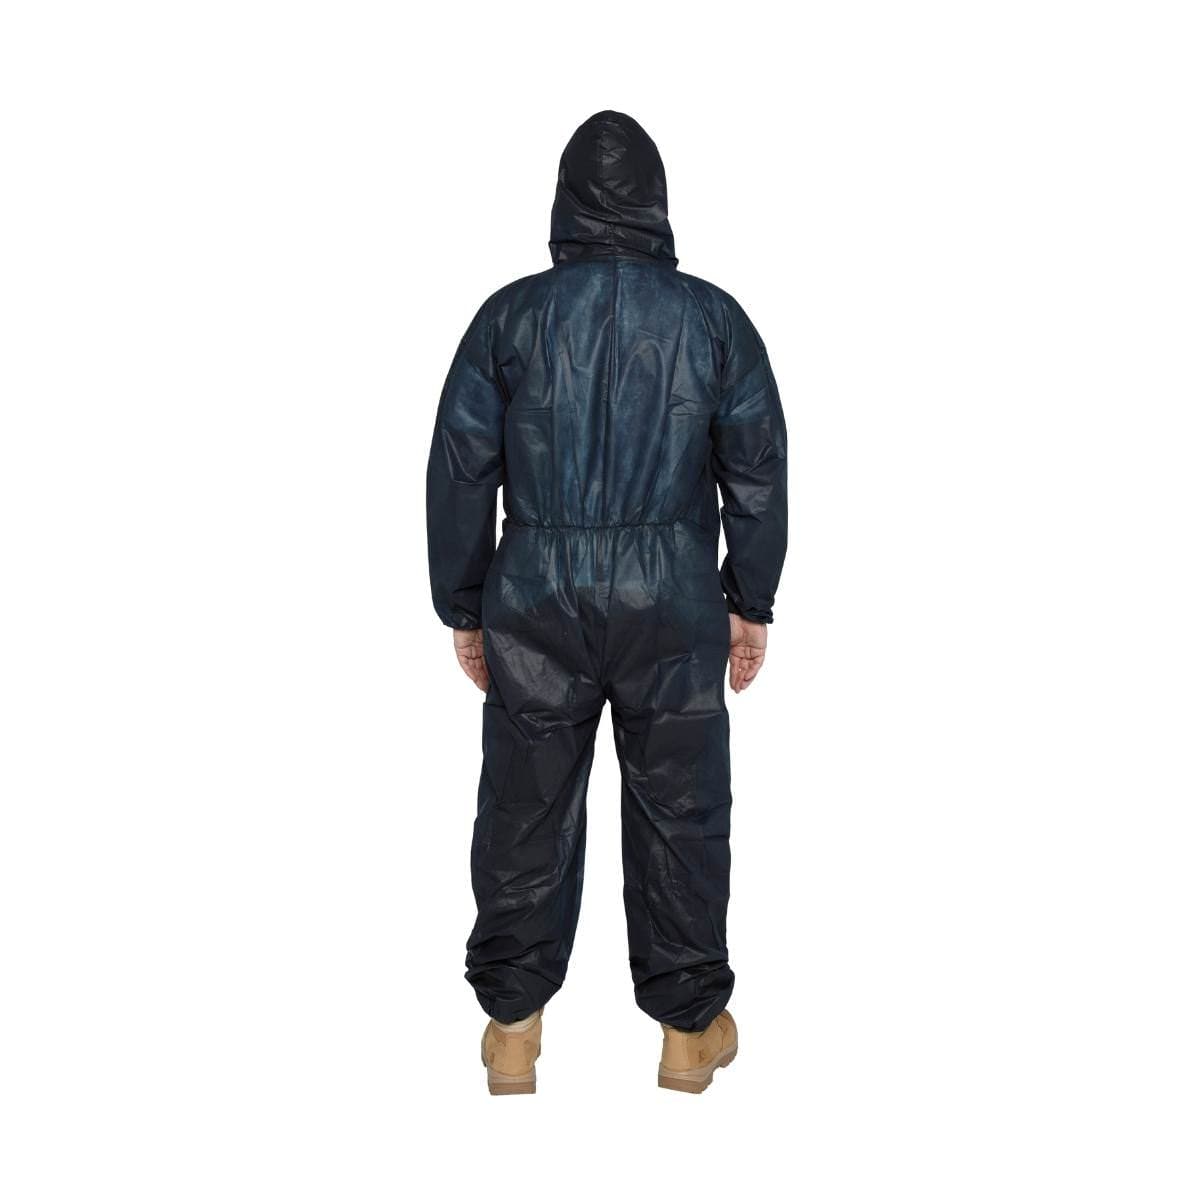 SafeRite® Disposable Coverall Blue Polypropylene SRDCPPB (Each)